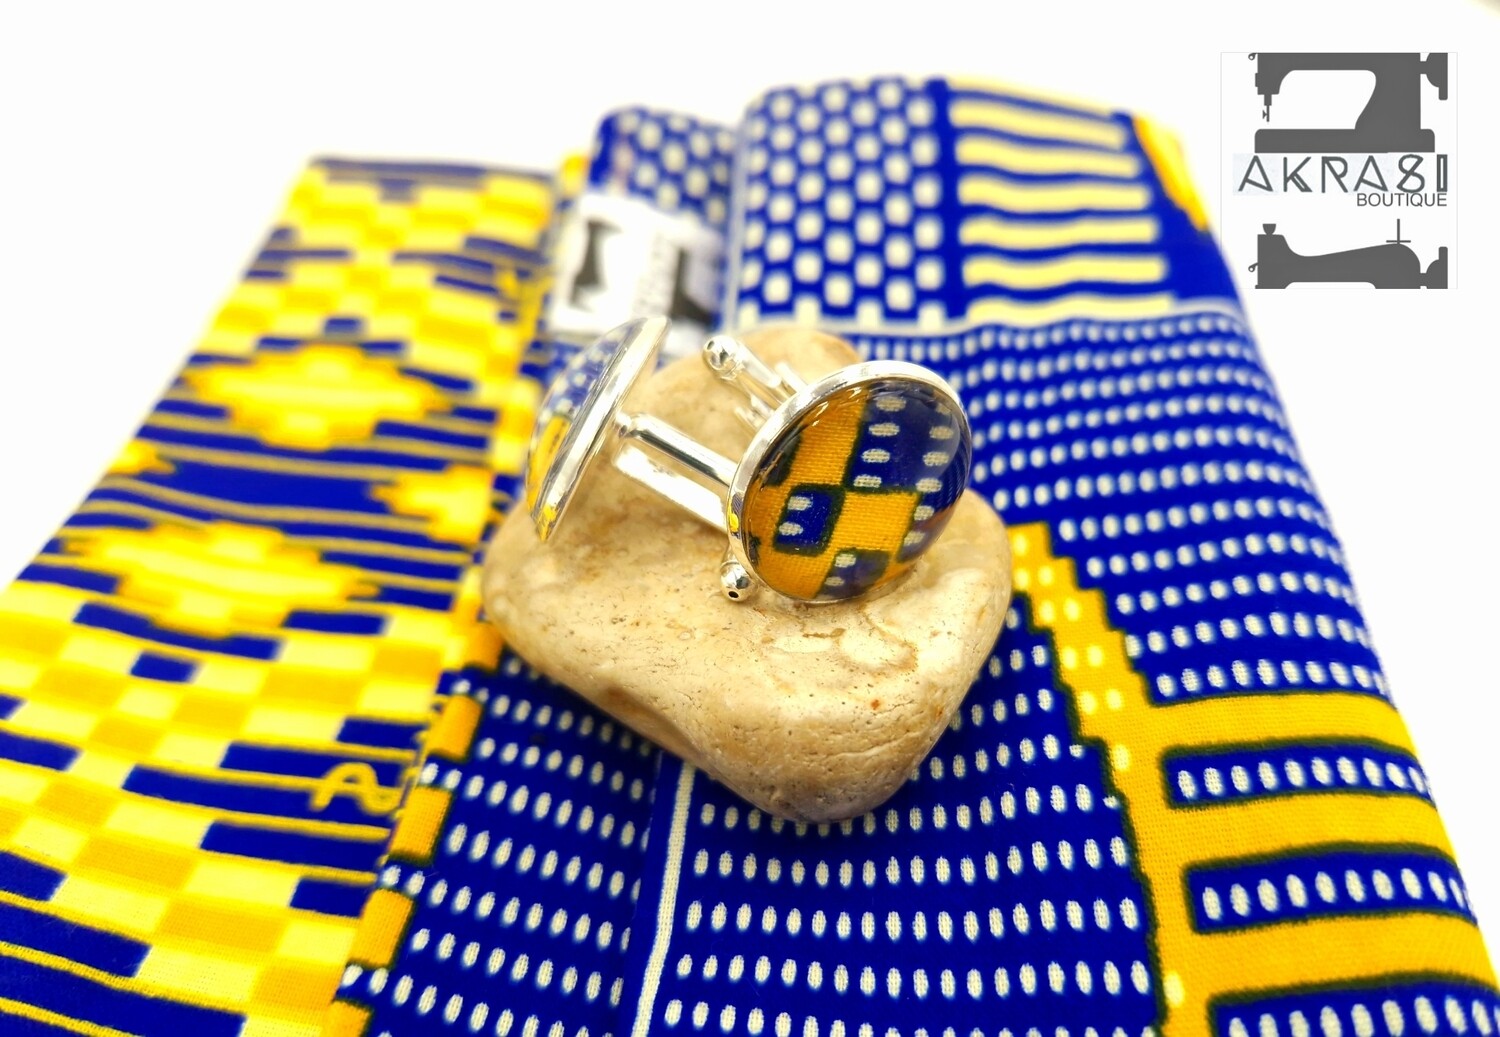 Kente wax print pocket square with cufflinks and cravat